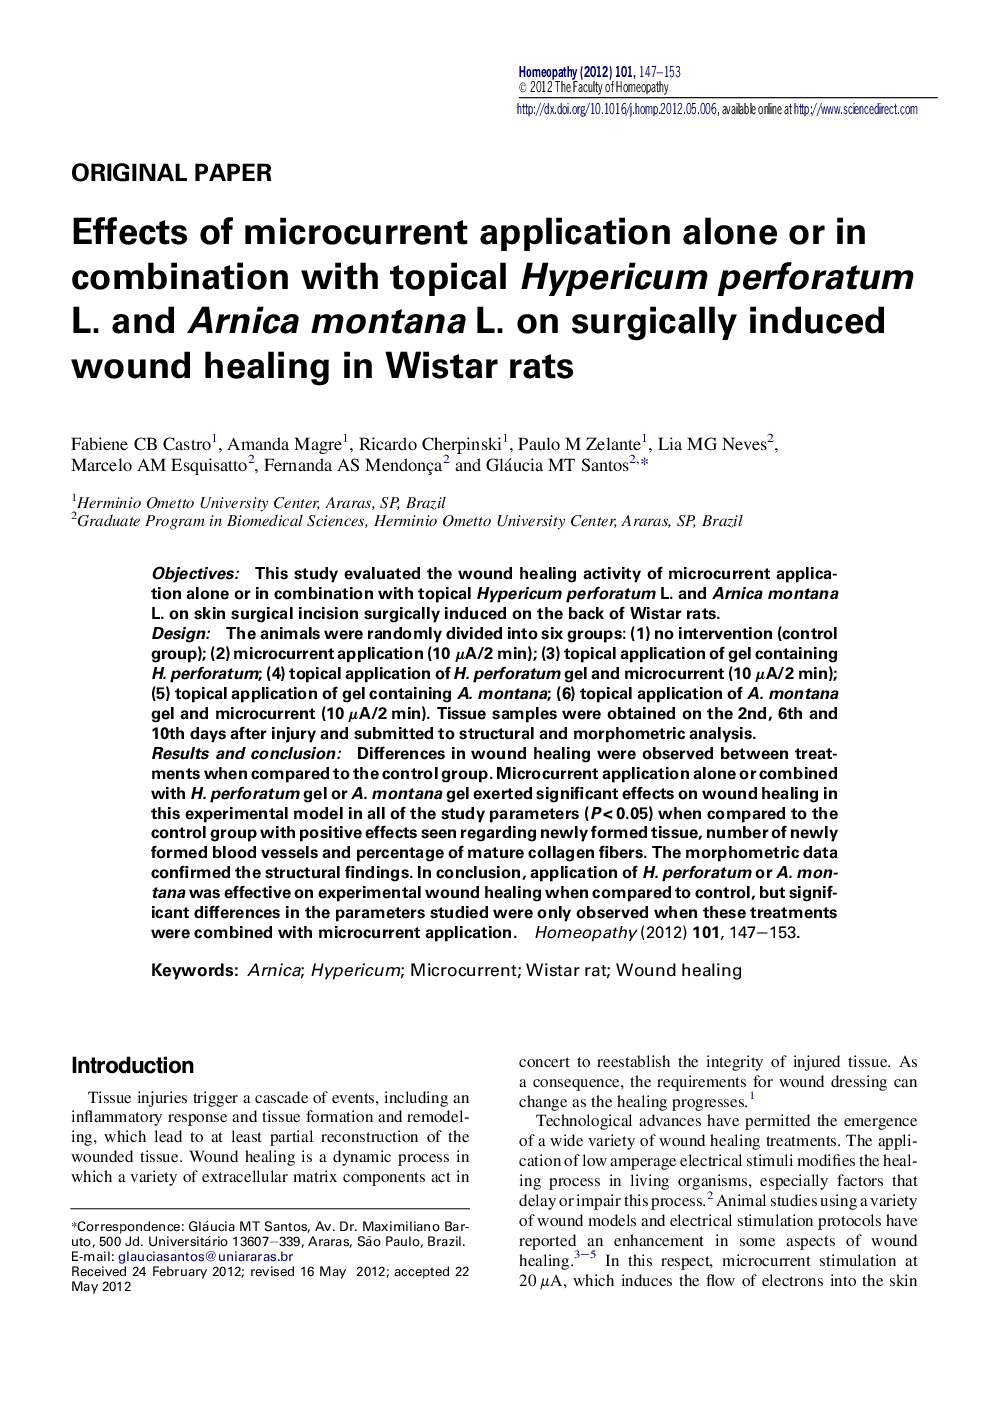 Effects of microcurrent application alone or in combination with topical Hypericum perforatum L. and Arnica montana L. on surgically induced wound healing in Wistar rats